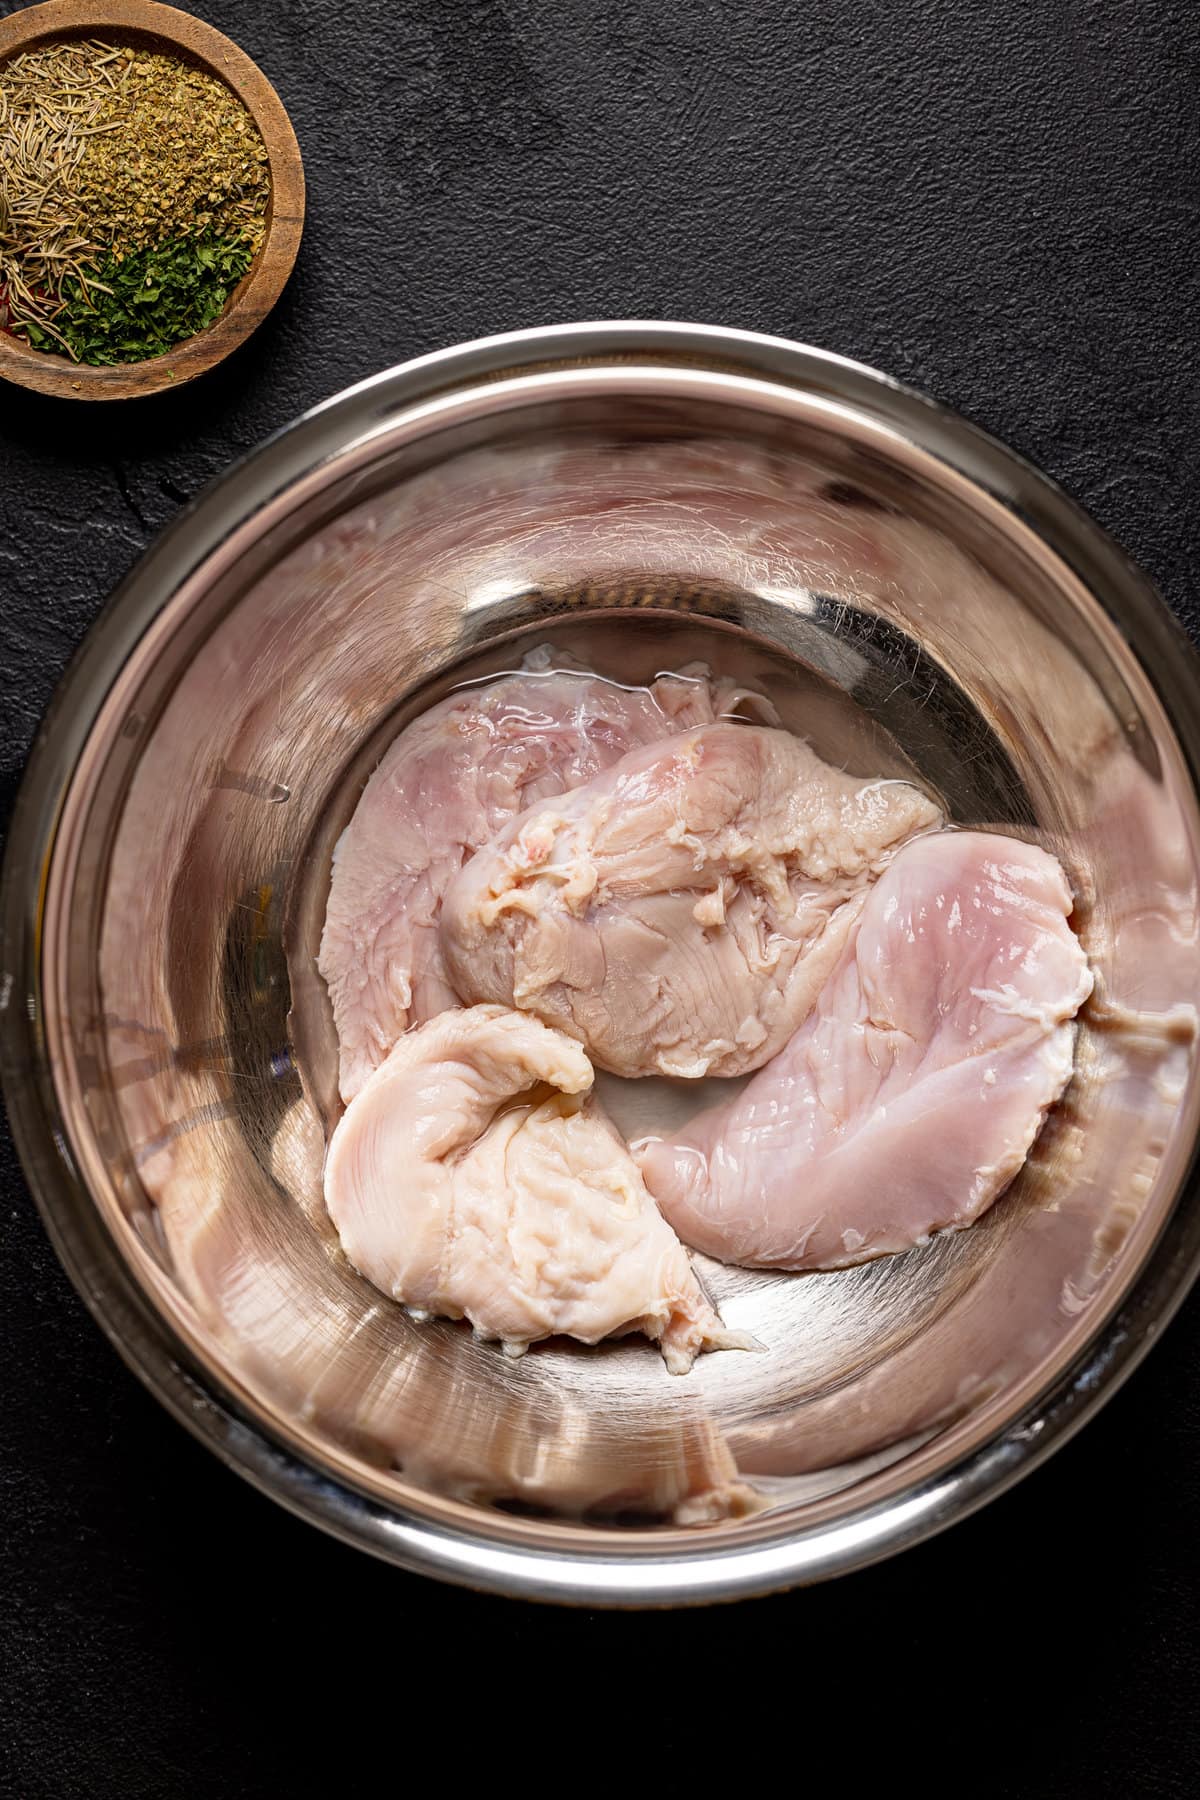 Raw chicken in a metal bowl